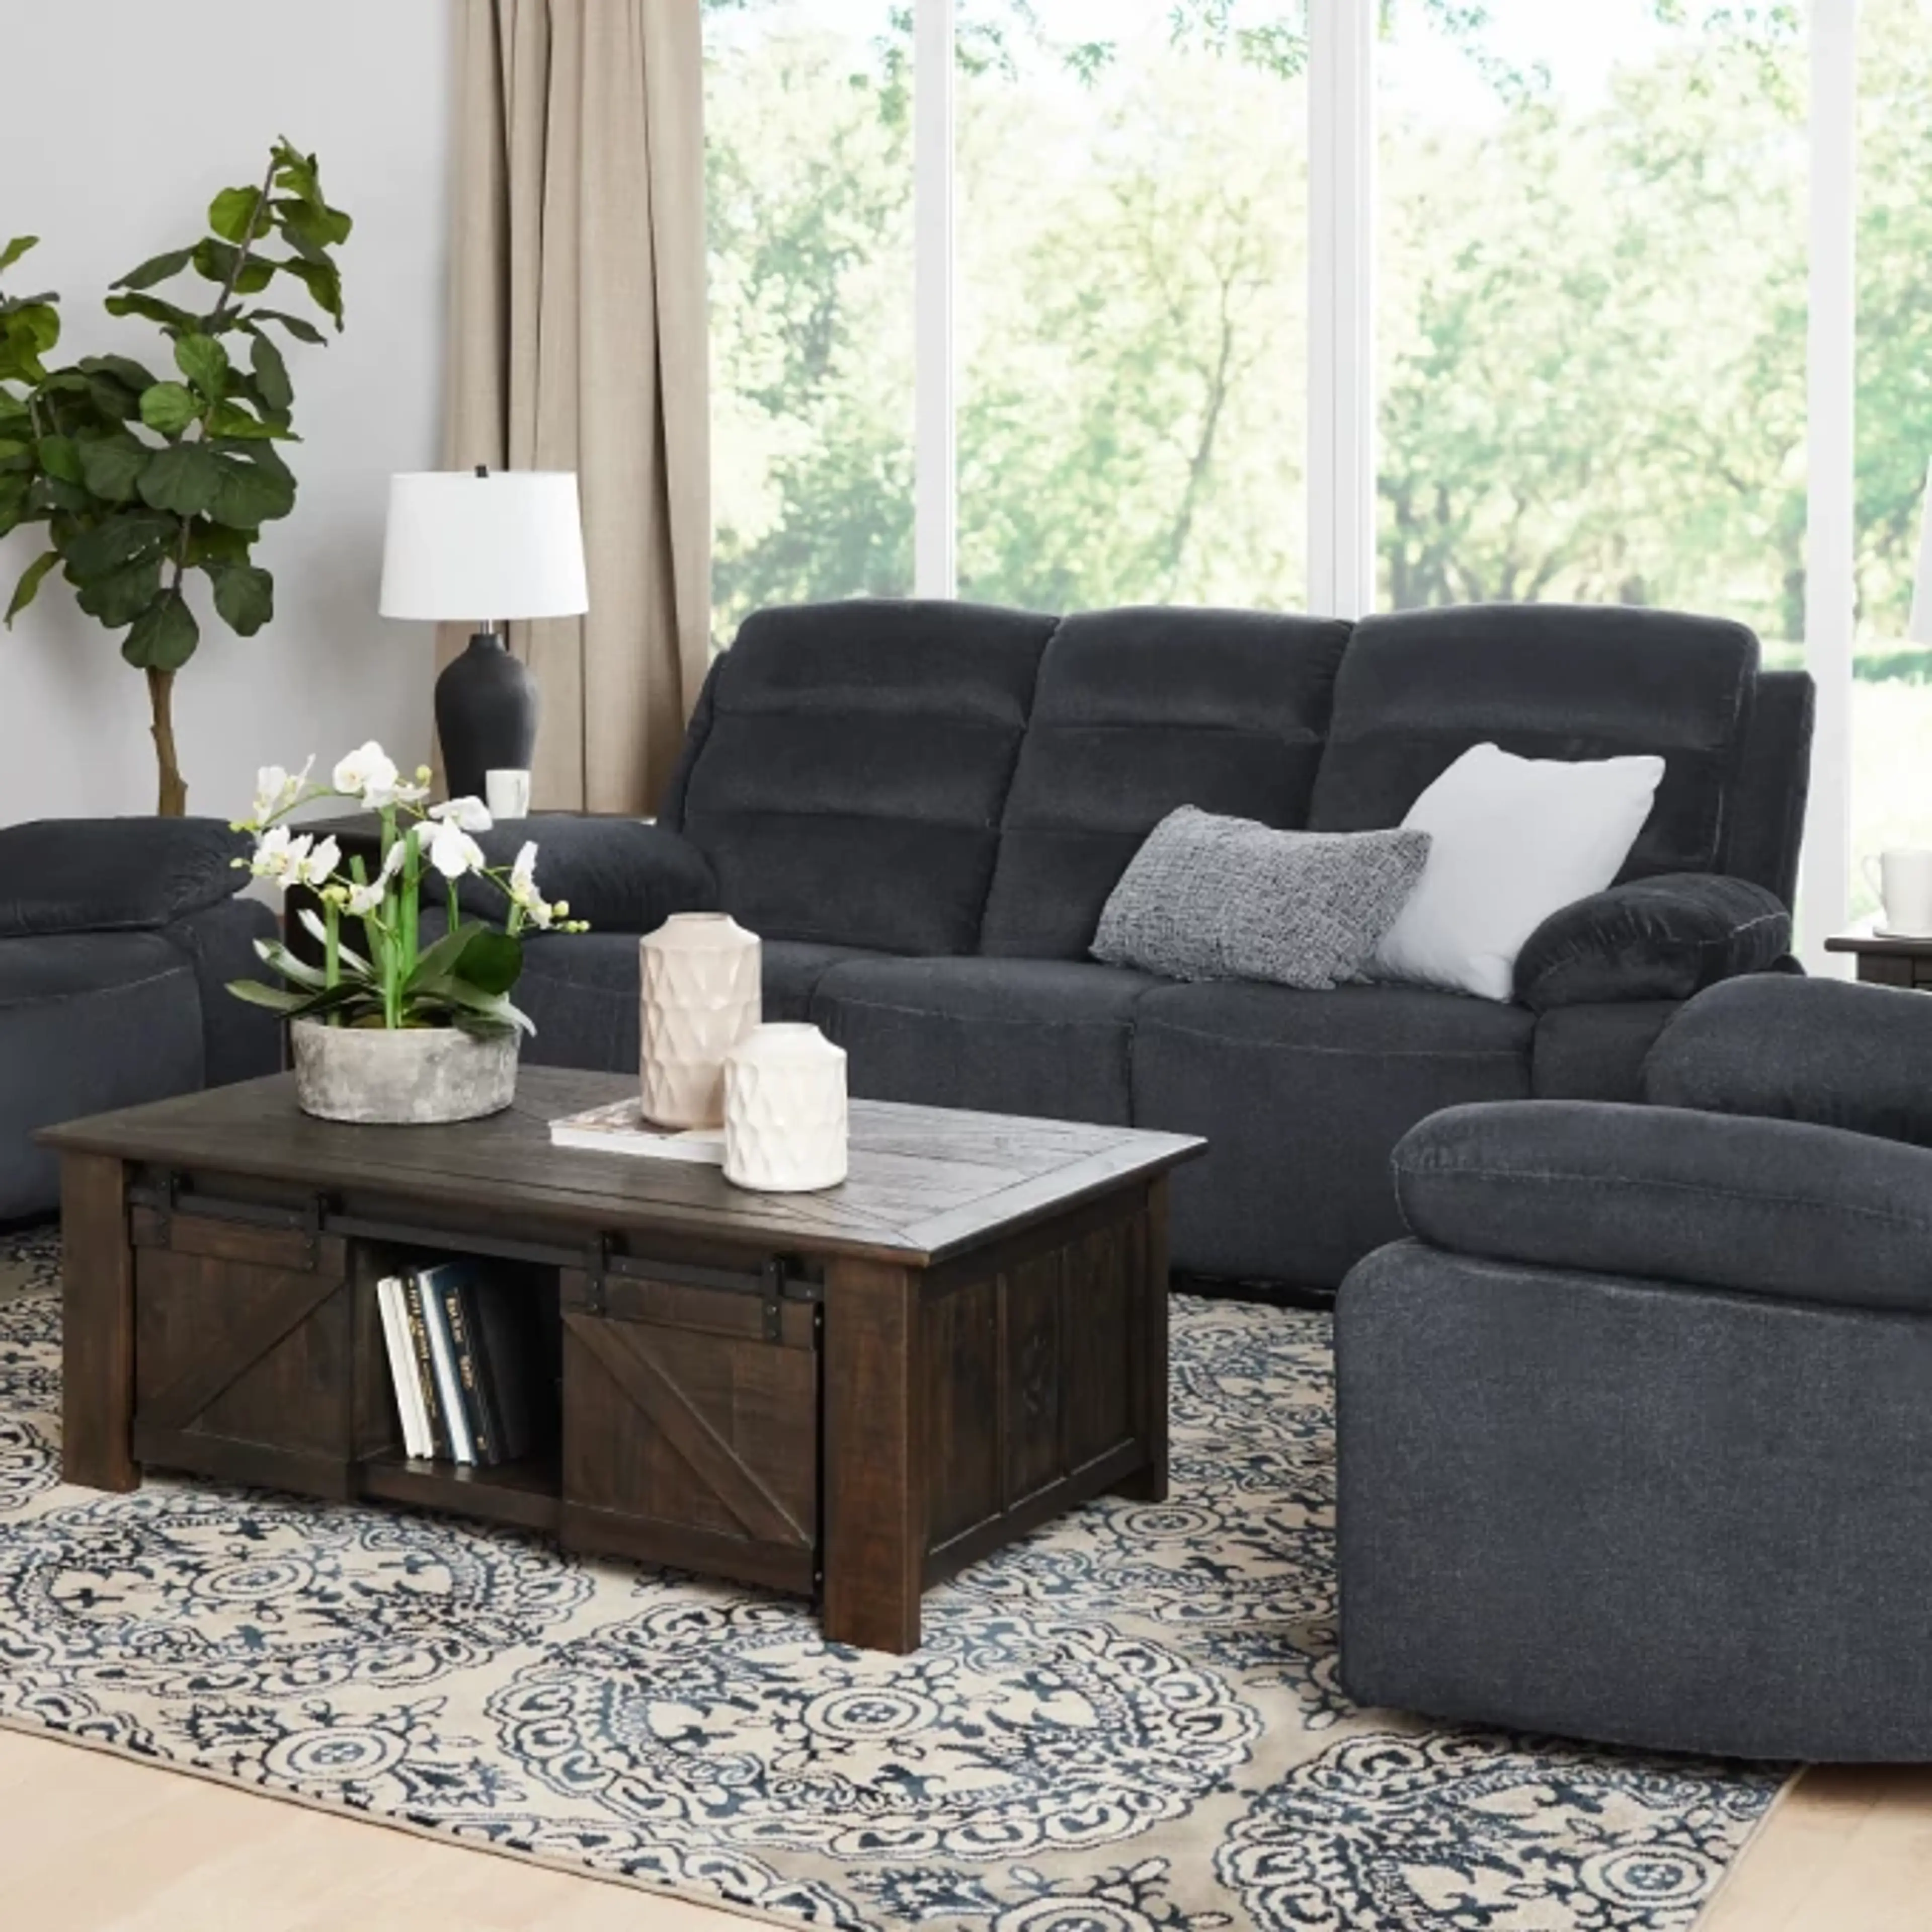 UP TO 20% OFF LIVING ROOM*